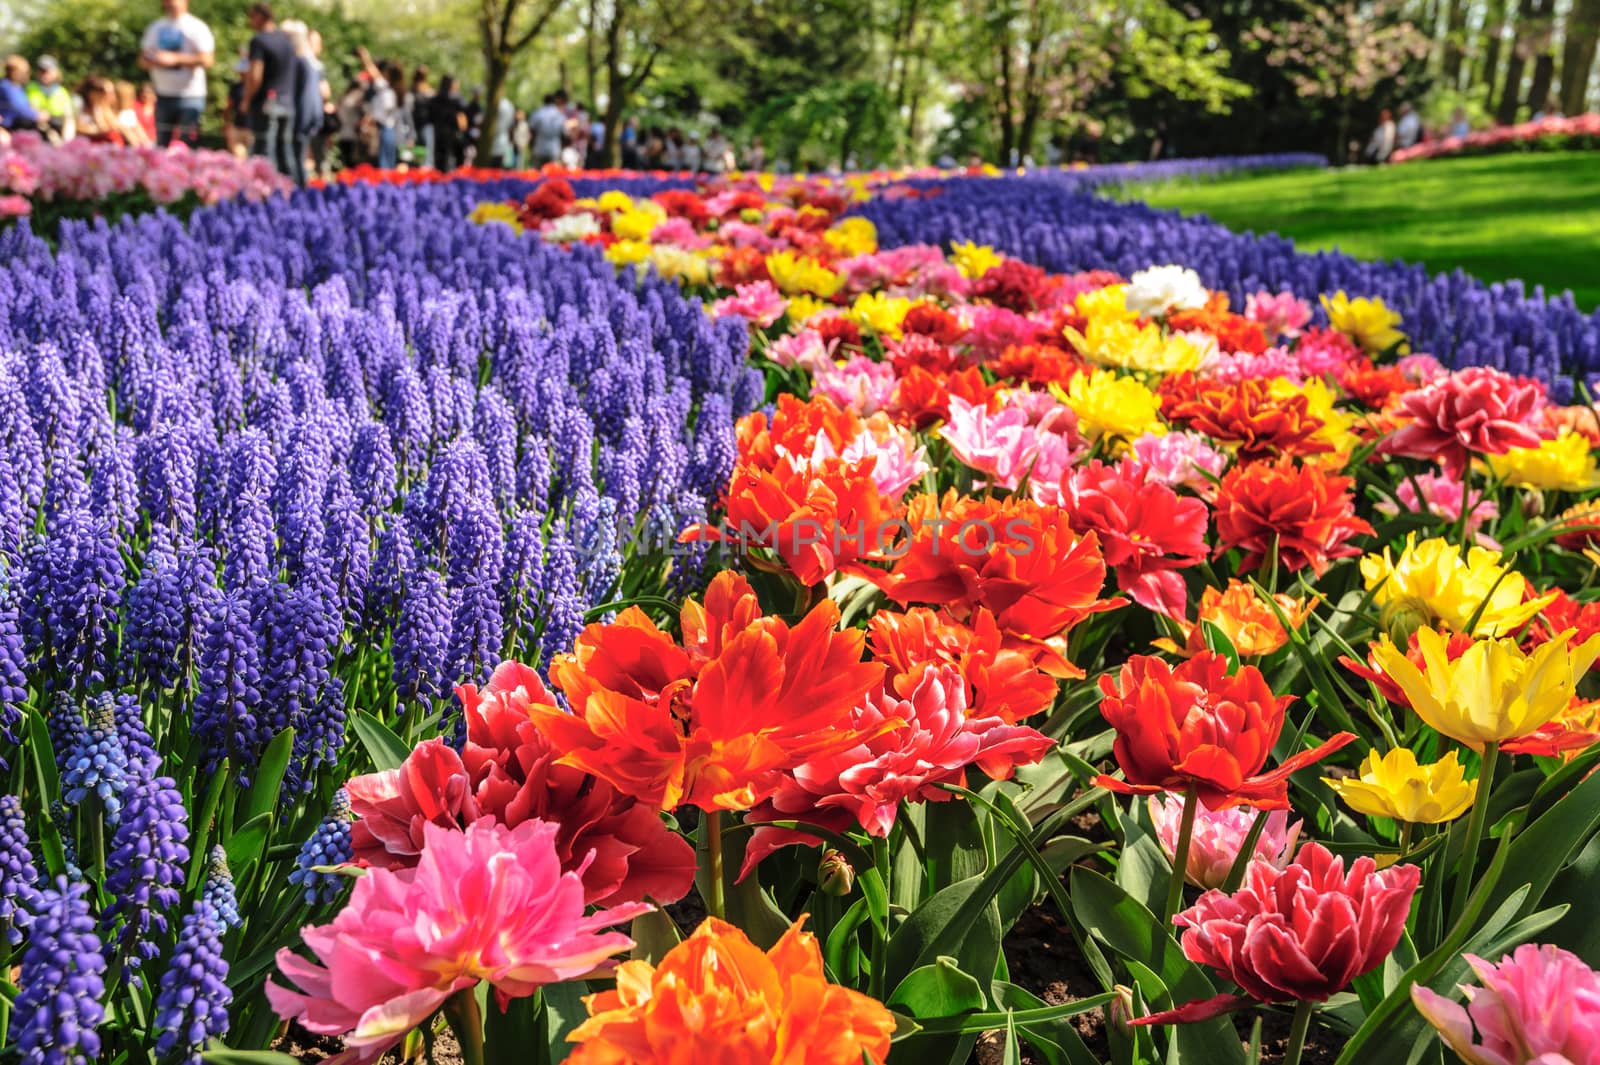 Large multicolored tulips flowerbed in Netherlands, unrecognizable people at background